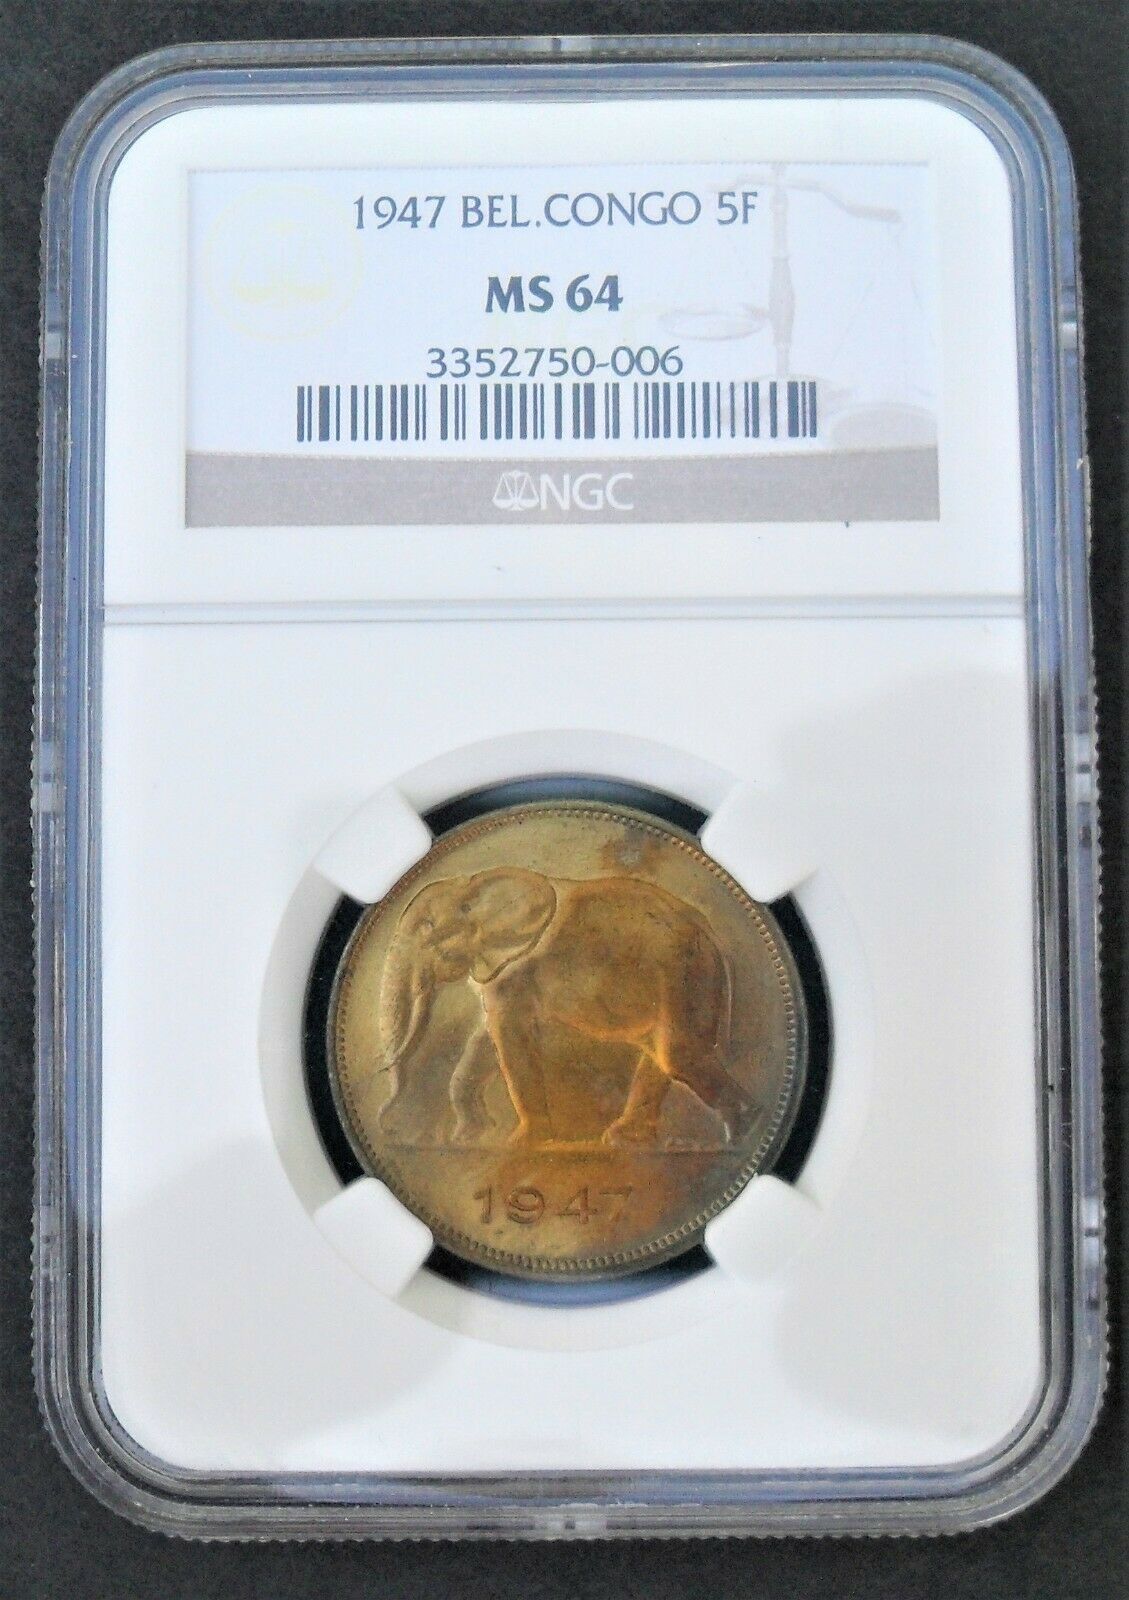 1947 Belgian Congo 5 F , Ngc  Ms 64  , Nice  Coin , One Of The Best Graded